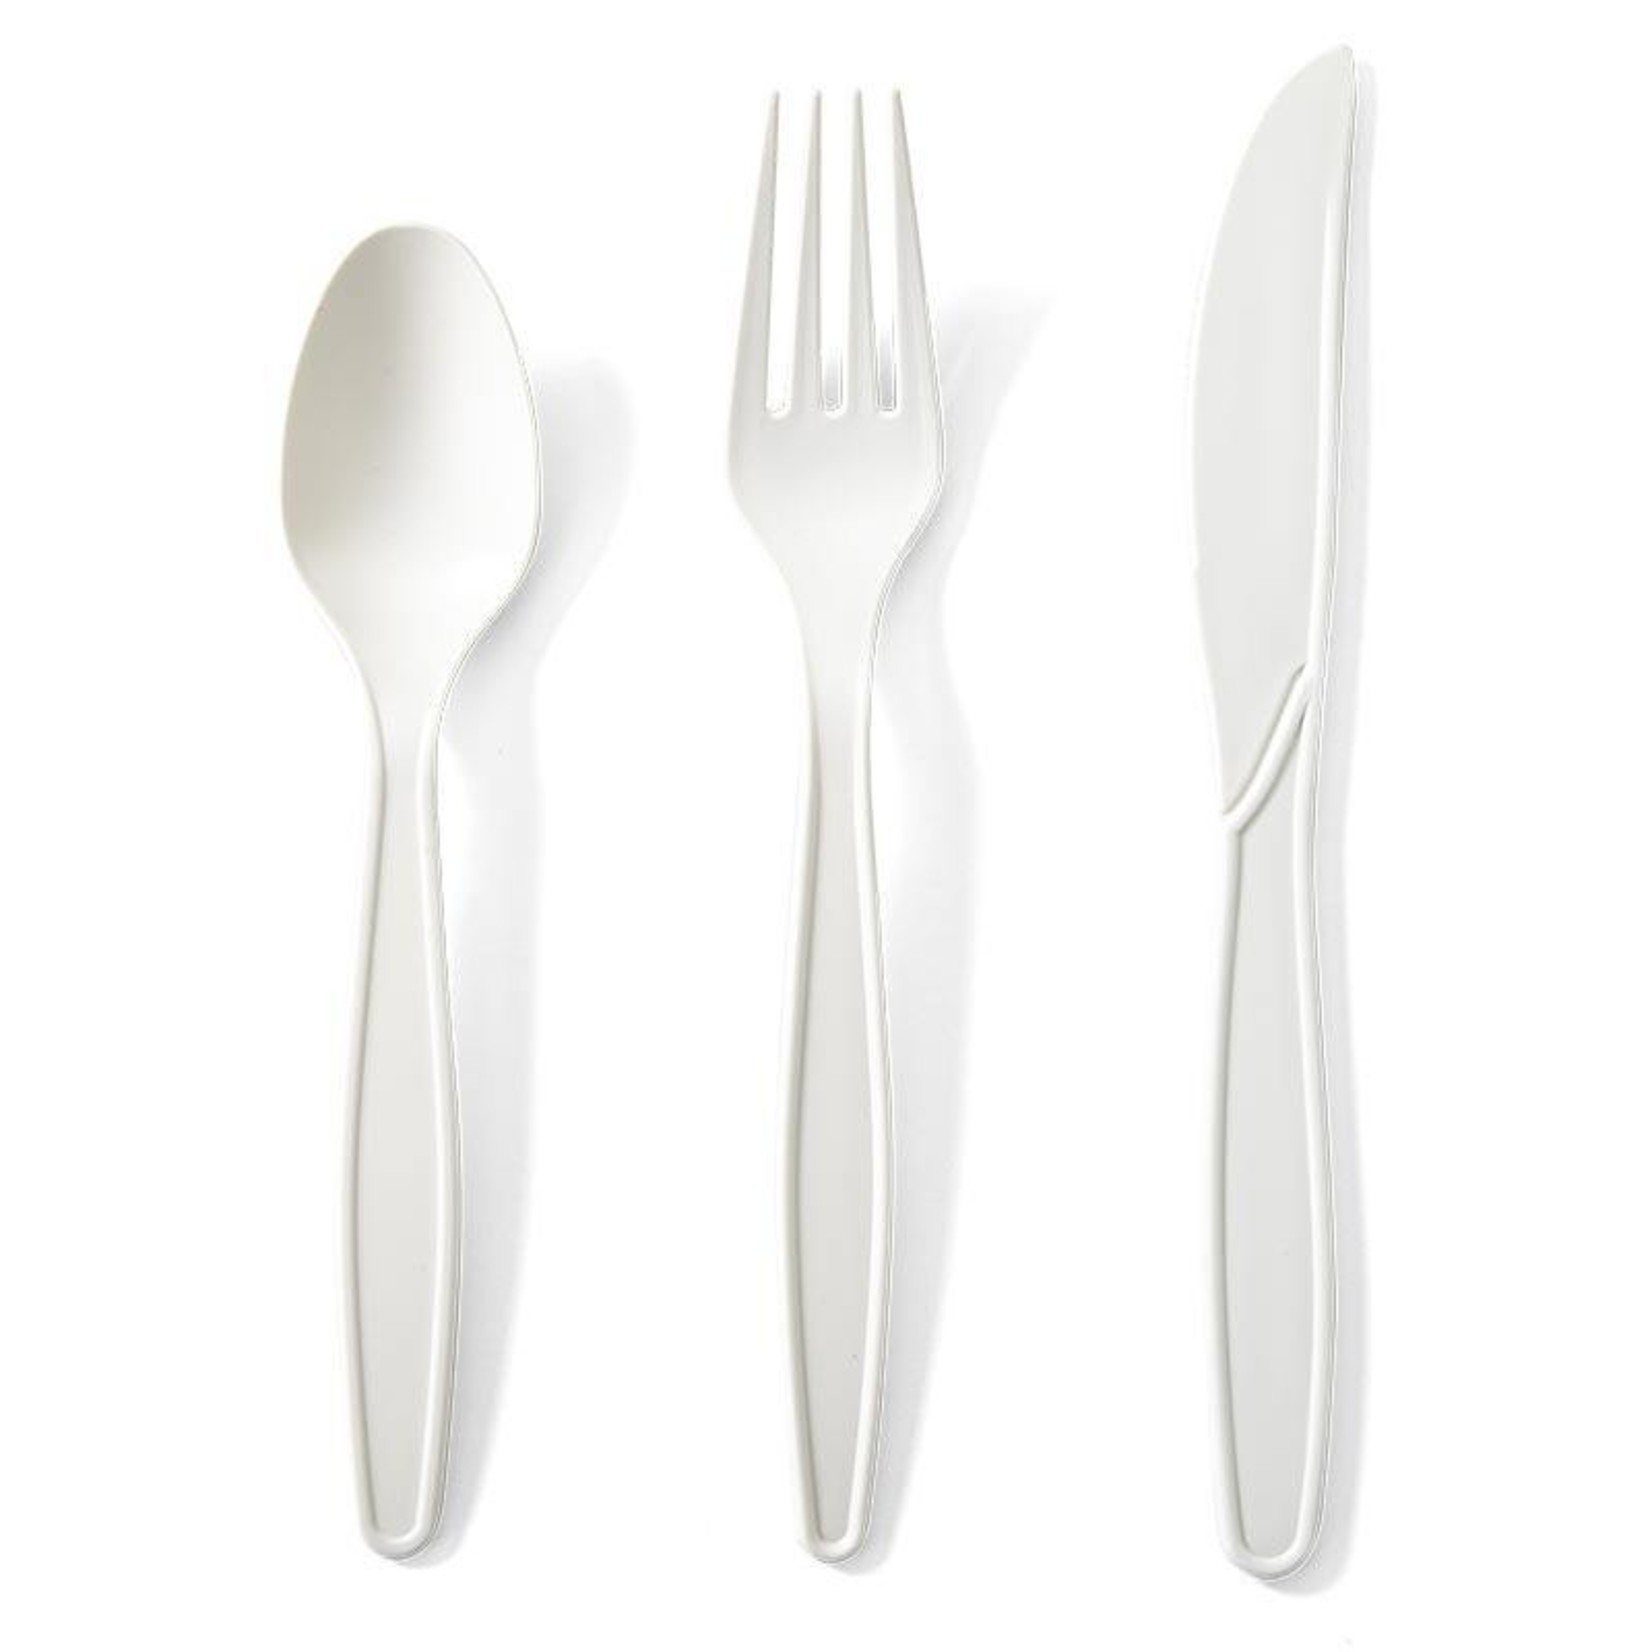 EcoSoulife EcoSoulife Cornstarch disposable cutlery set 24pc